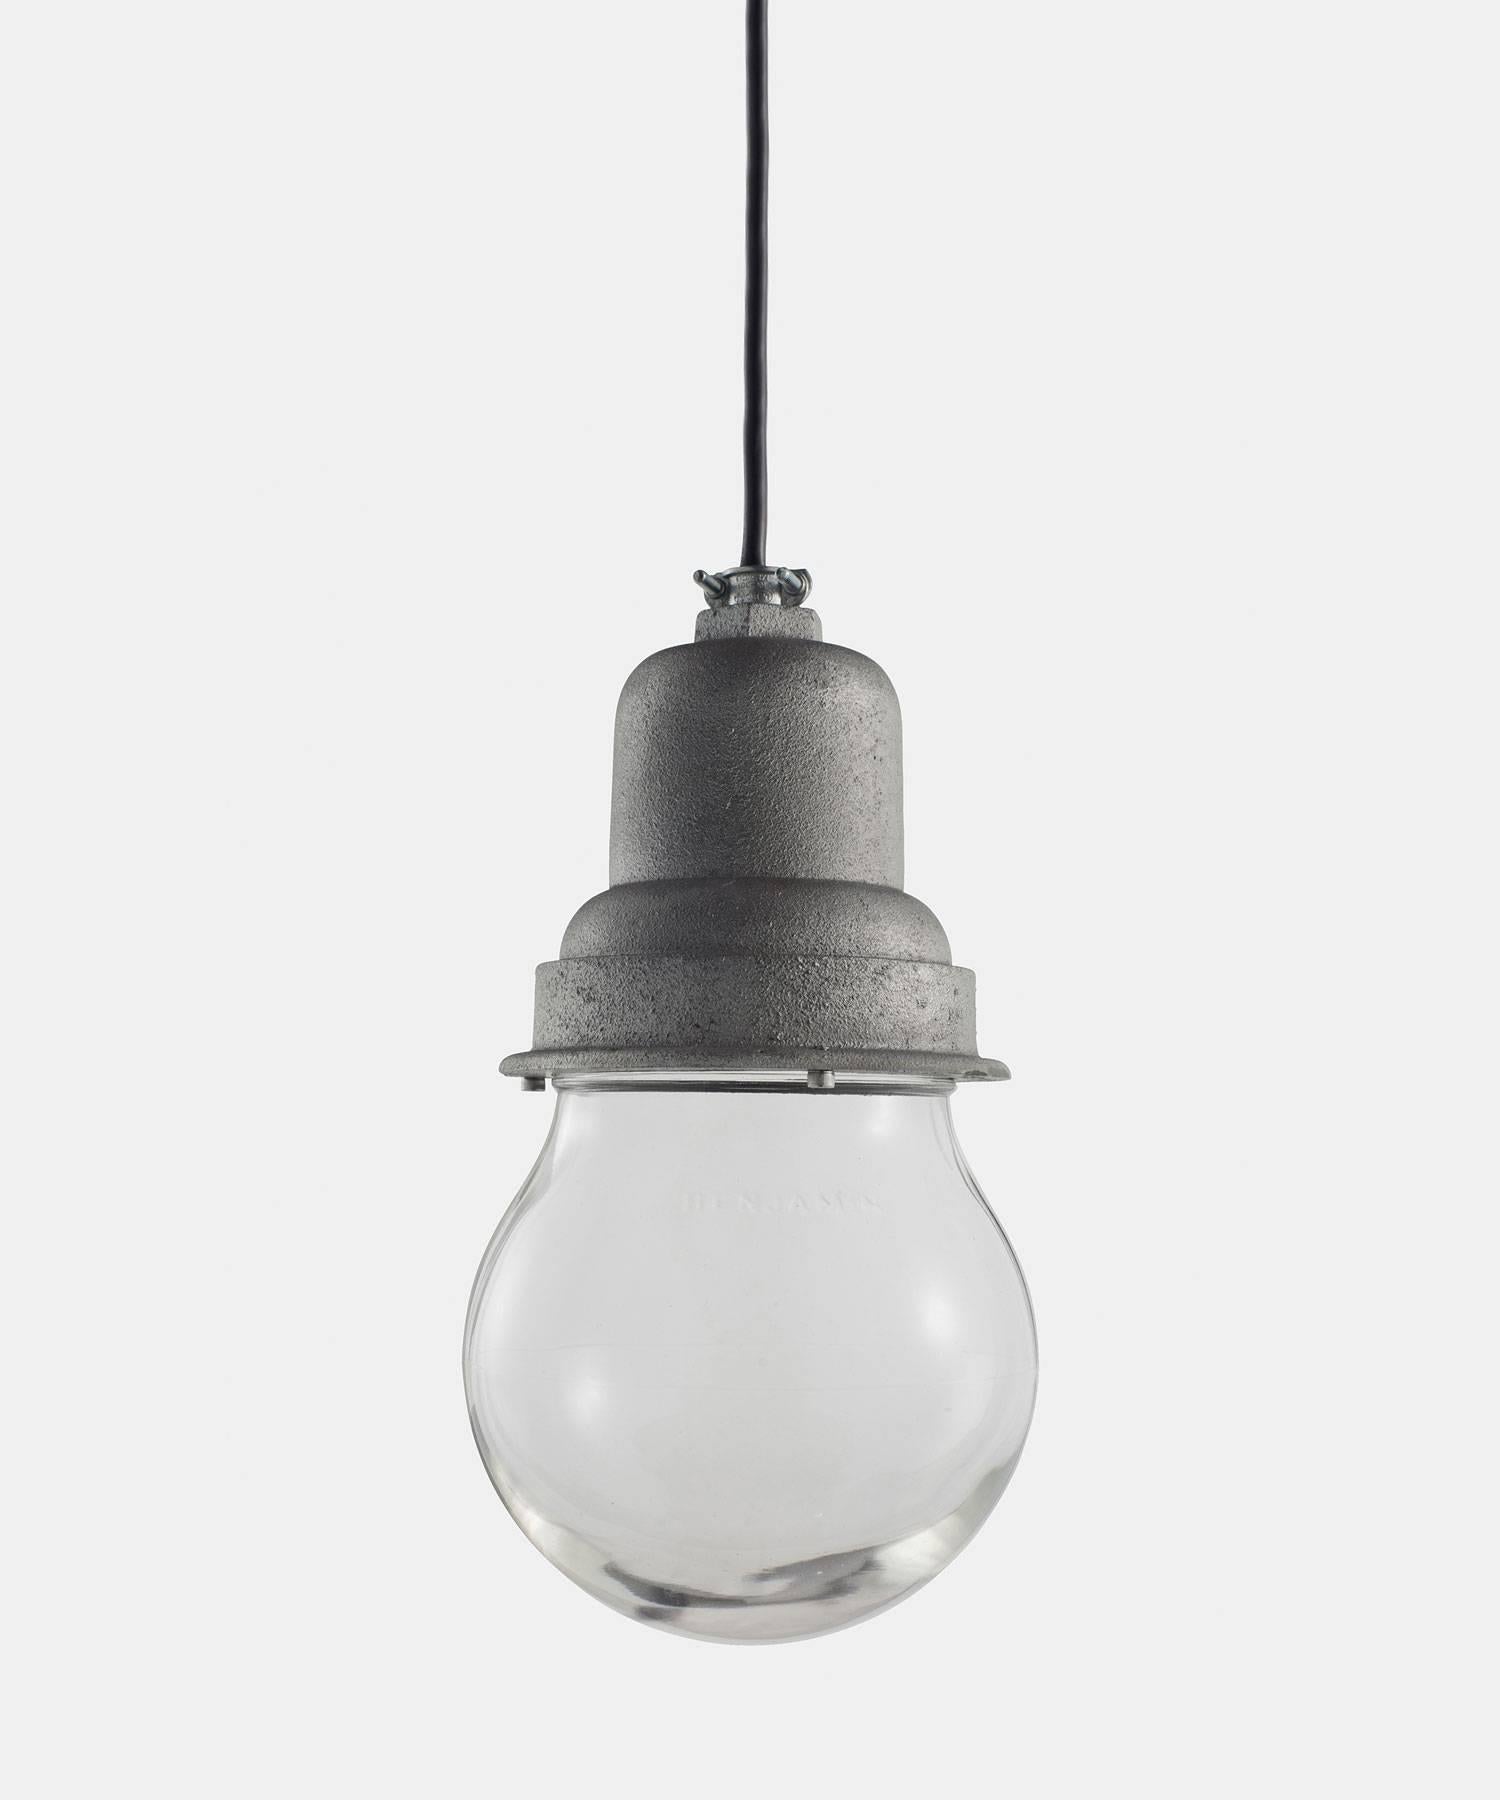 Appleton factory pendant with cast iron mount and 6-inch glass globe. Industrial era American design with two-week lead time.

*Please Note: This fixture is made in Italy, and comes newly wired (eu wiring). It is not UL Listed. Standard Lead Time is